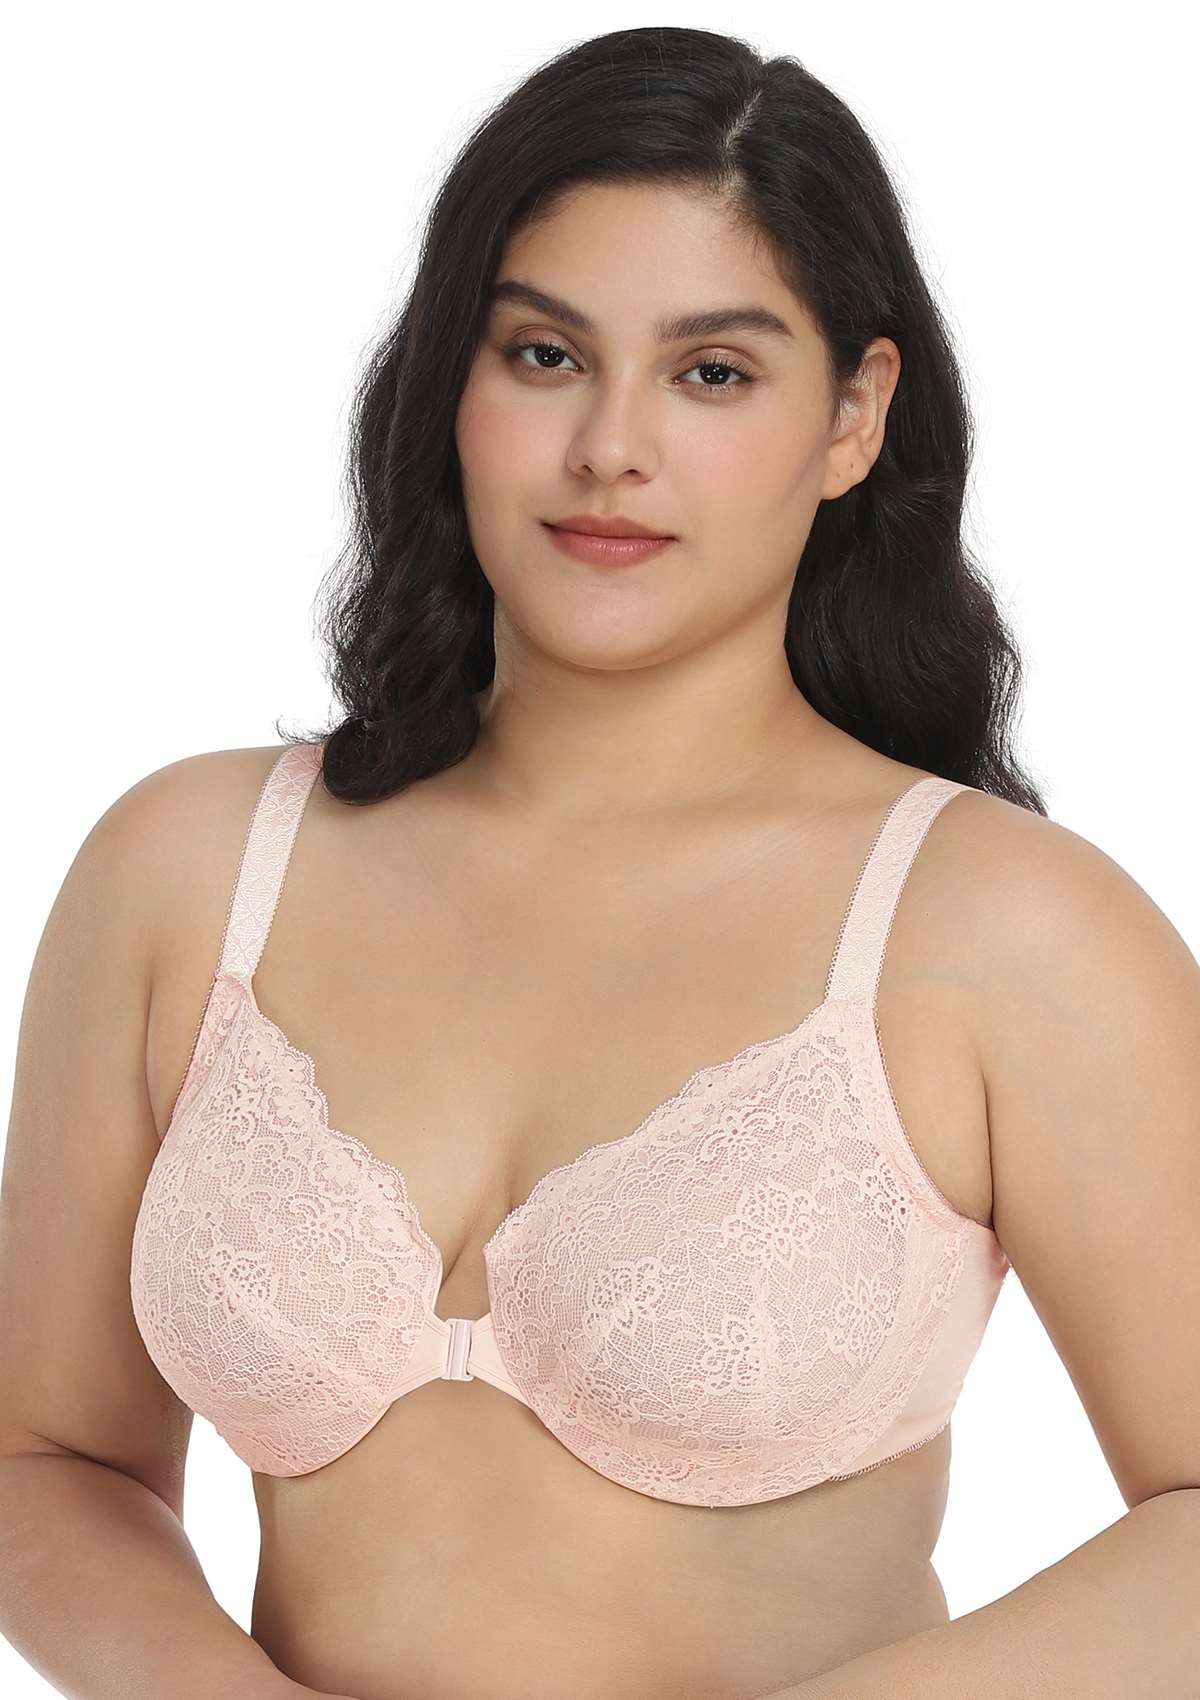 HSIA Nymphaea Easy-to-wear Front-Close Lace Unlined Underwire Bra - Dusty Peach / 34 / DDD/F